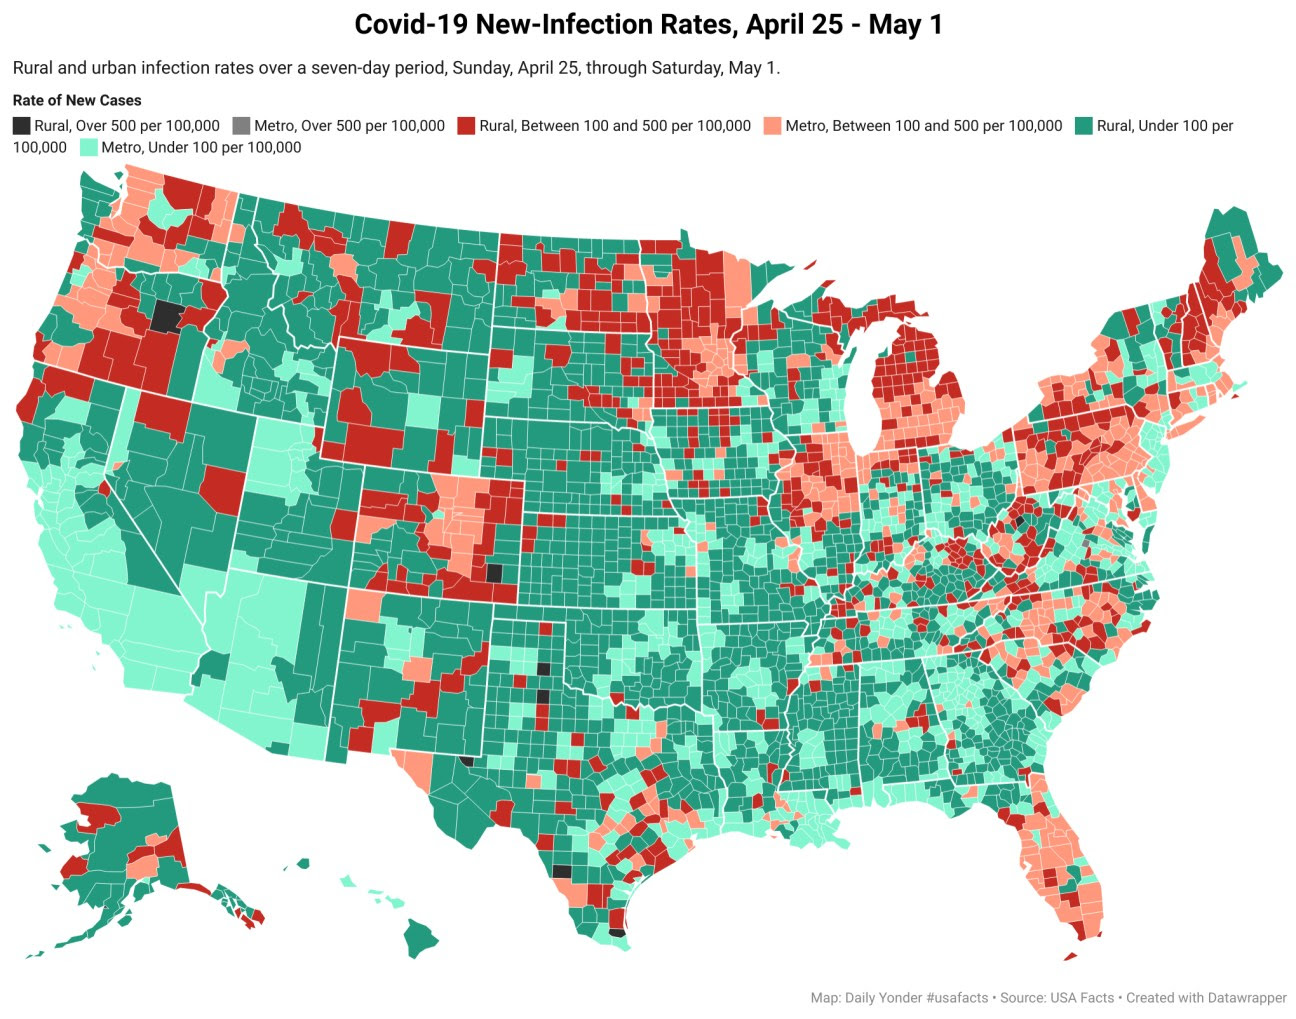 LEDE-covid-19-new-infection-rates-april-25-may-1-1296x1019.jpg